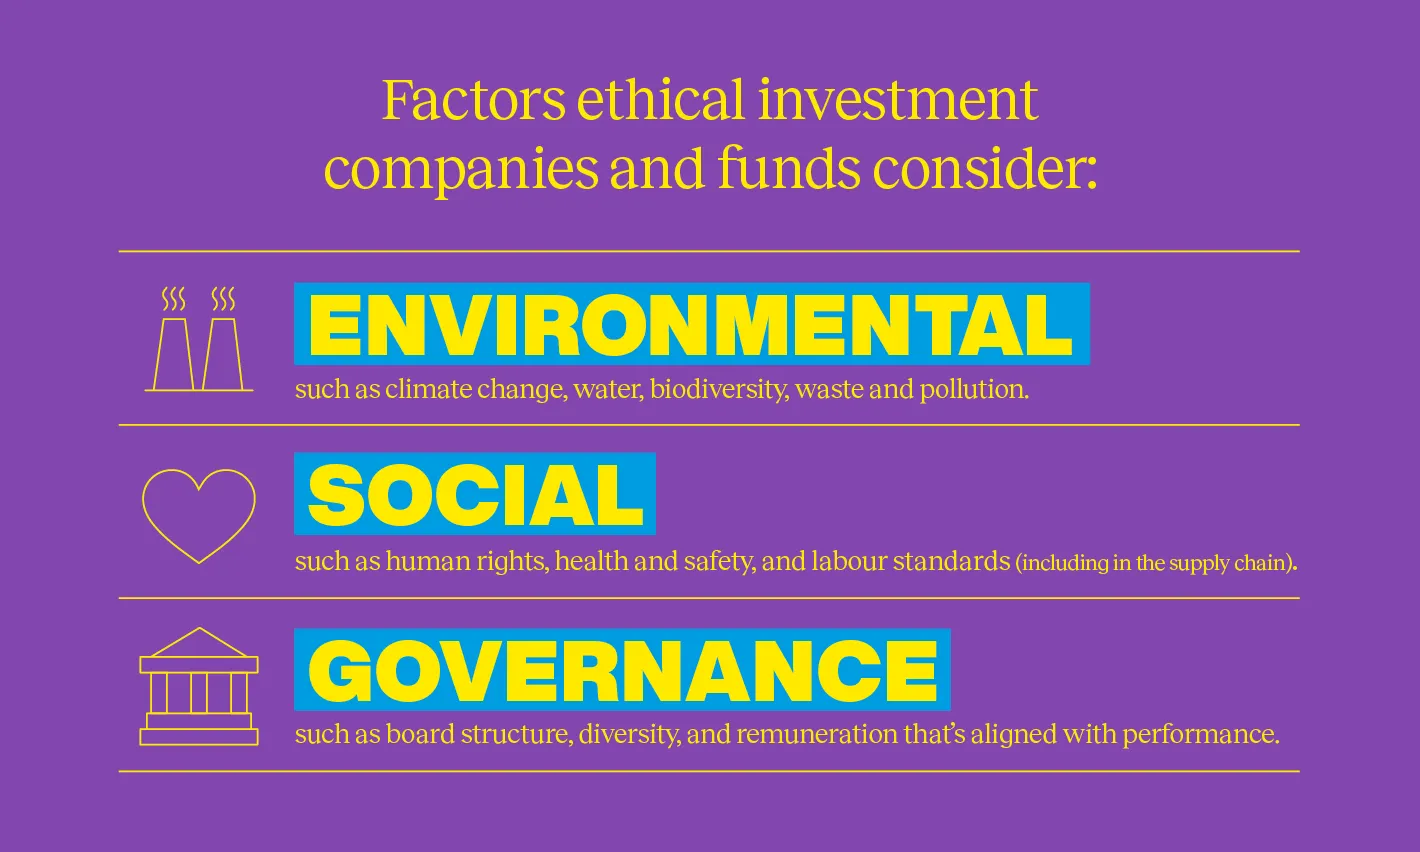 Factors ethical investment companies and funds consider